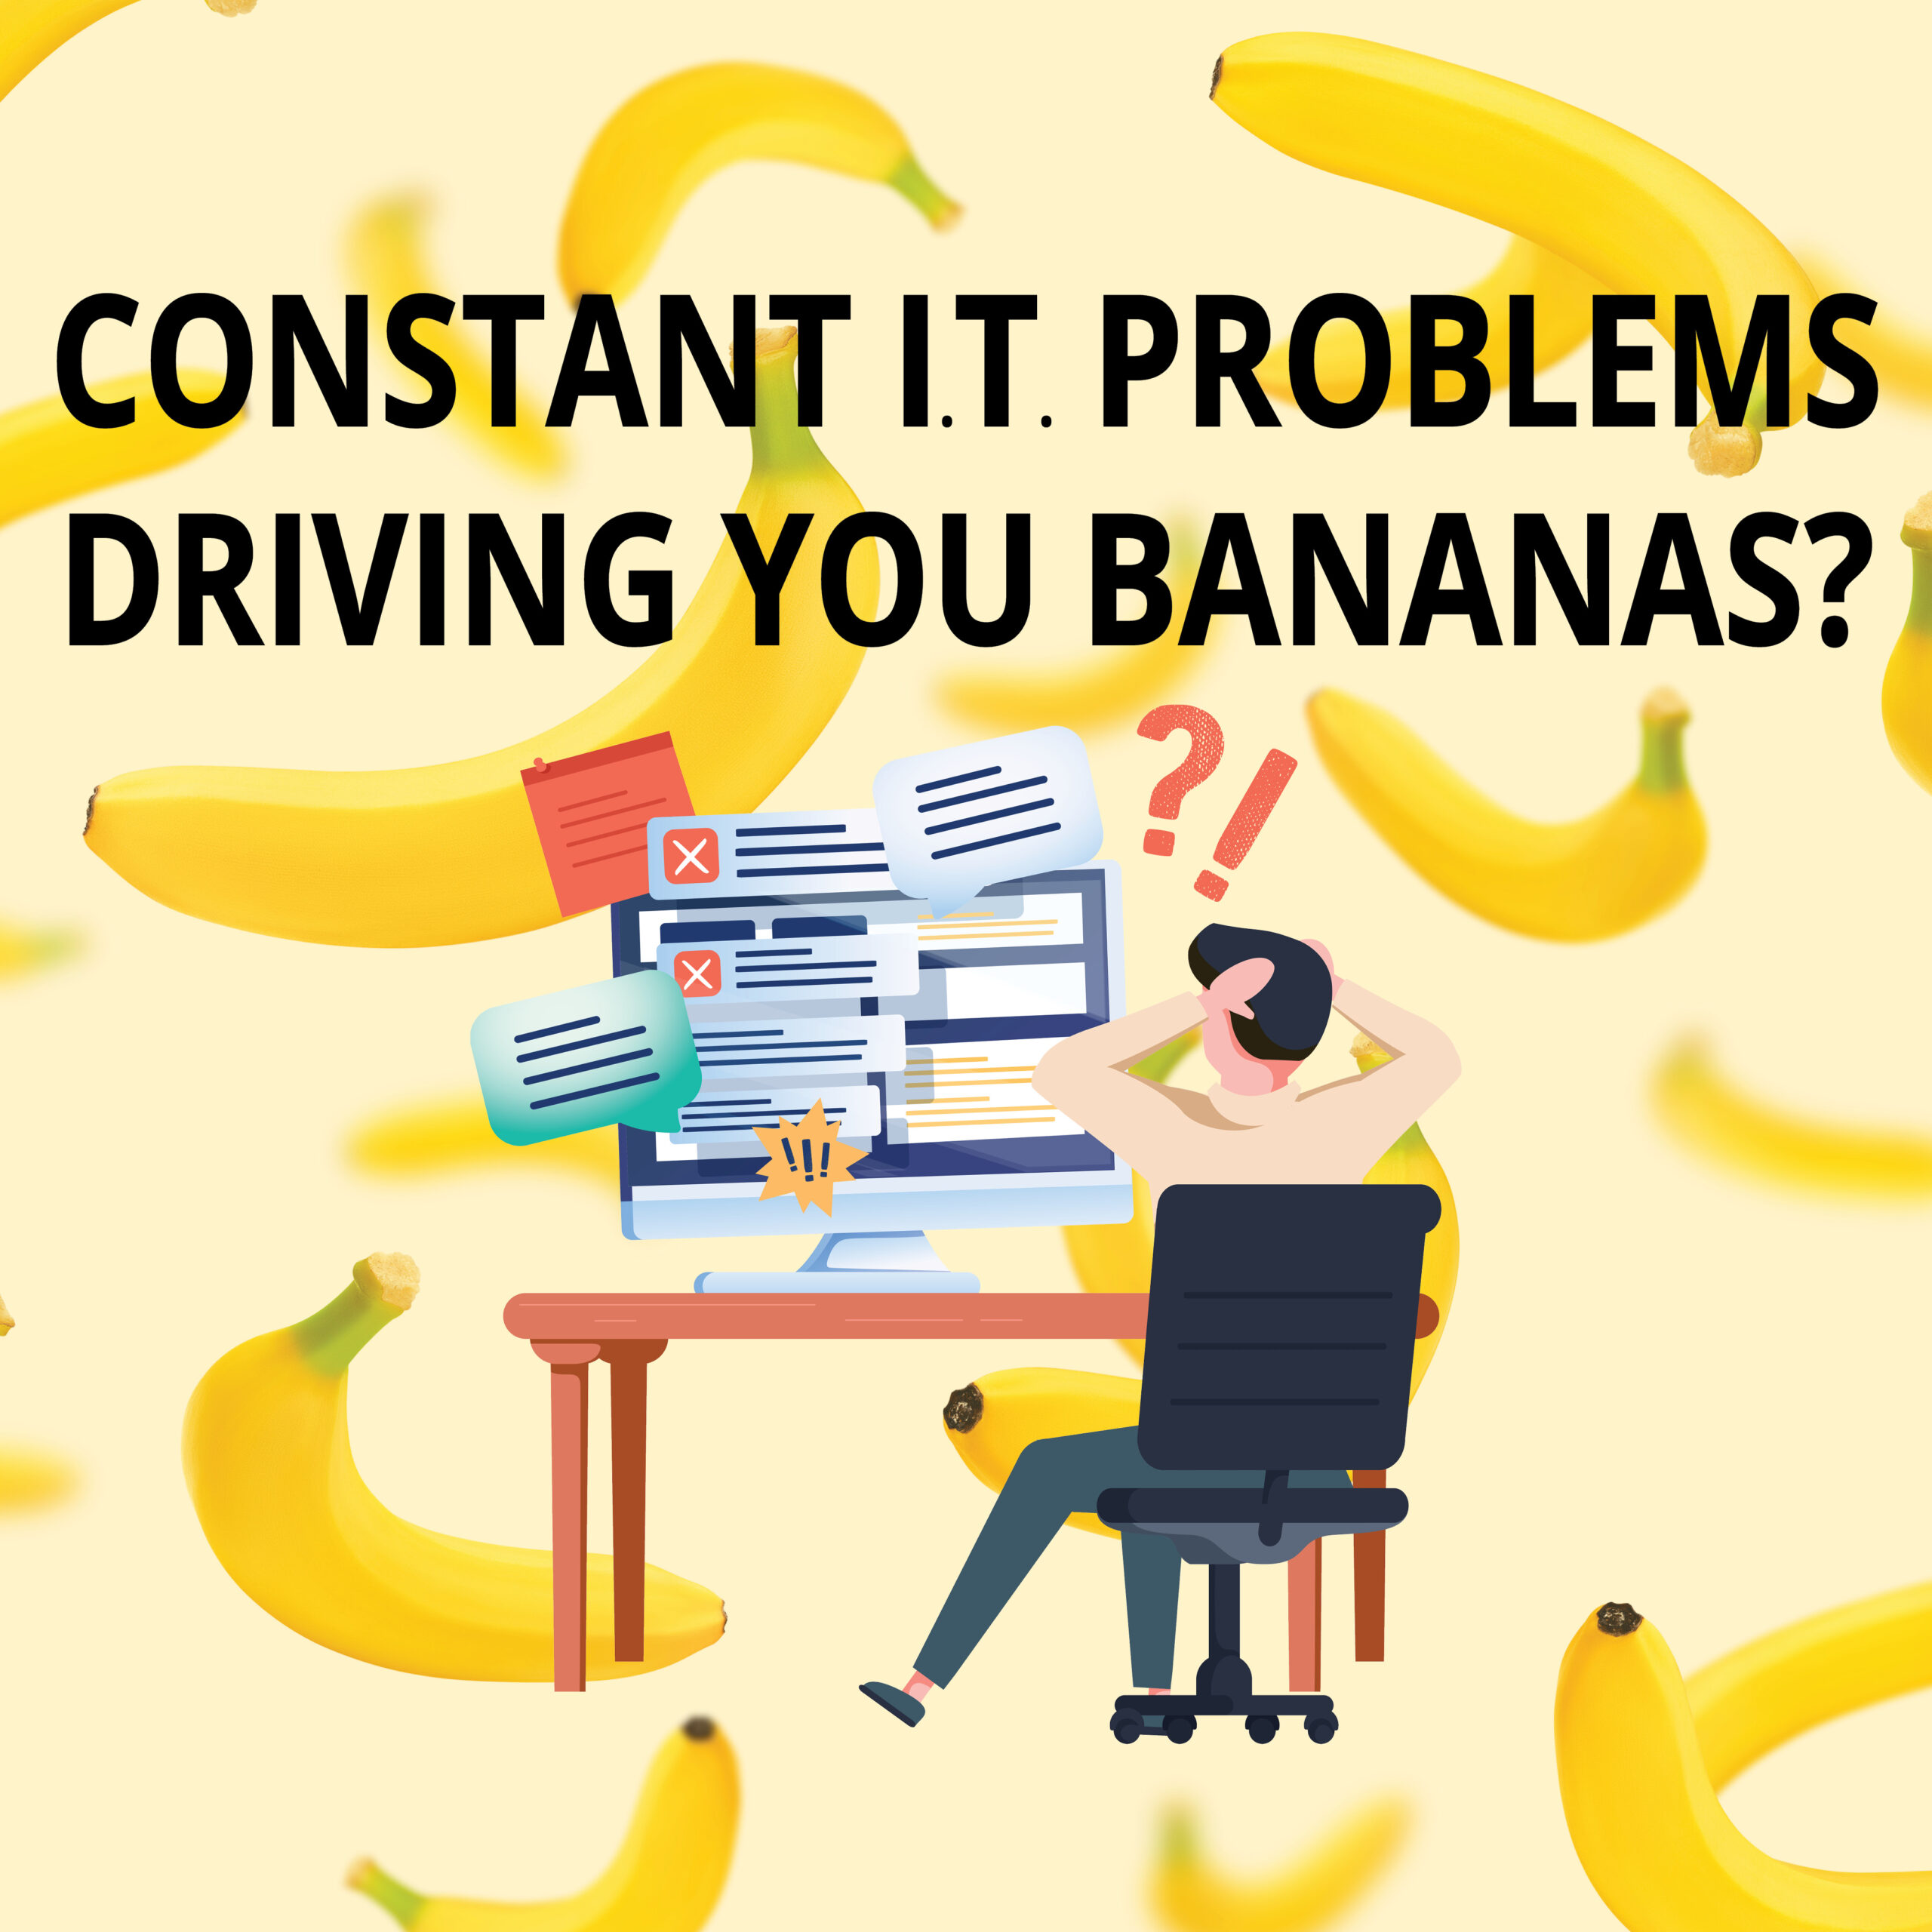 Constant IT Issues Driving You Bananas